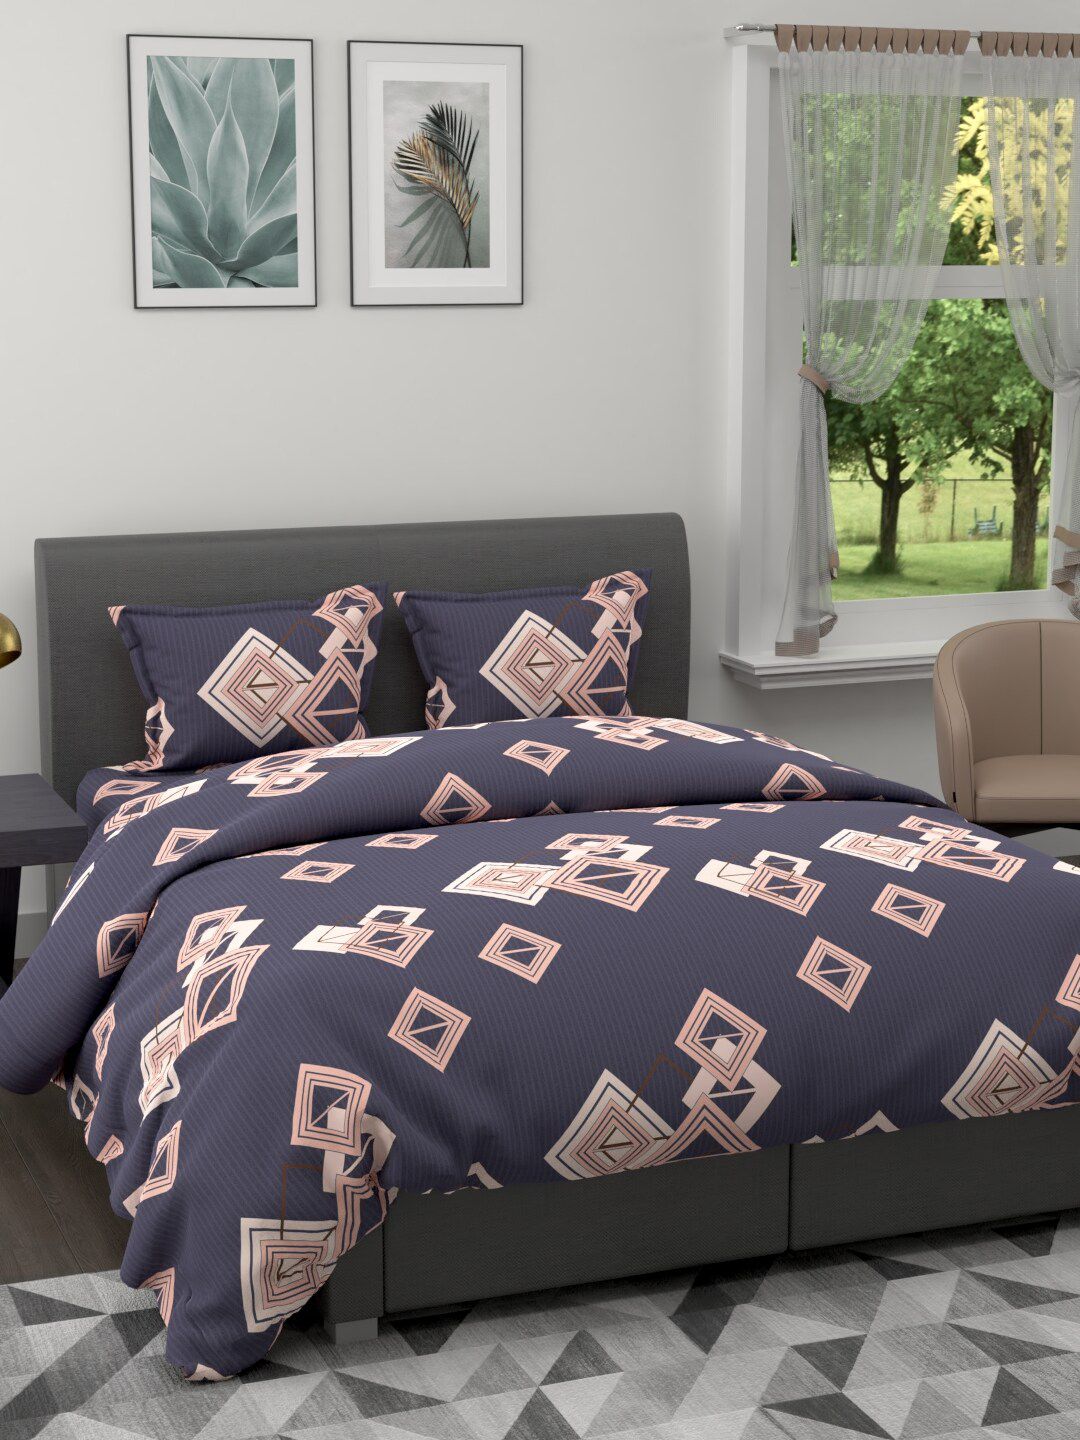 BIANCA Grey & Peach-Coloured Geometric Printed Cotton 150 GSM Double King Bedding Set Price in India